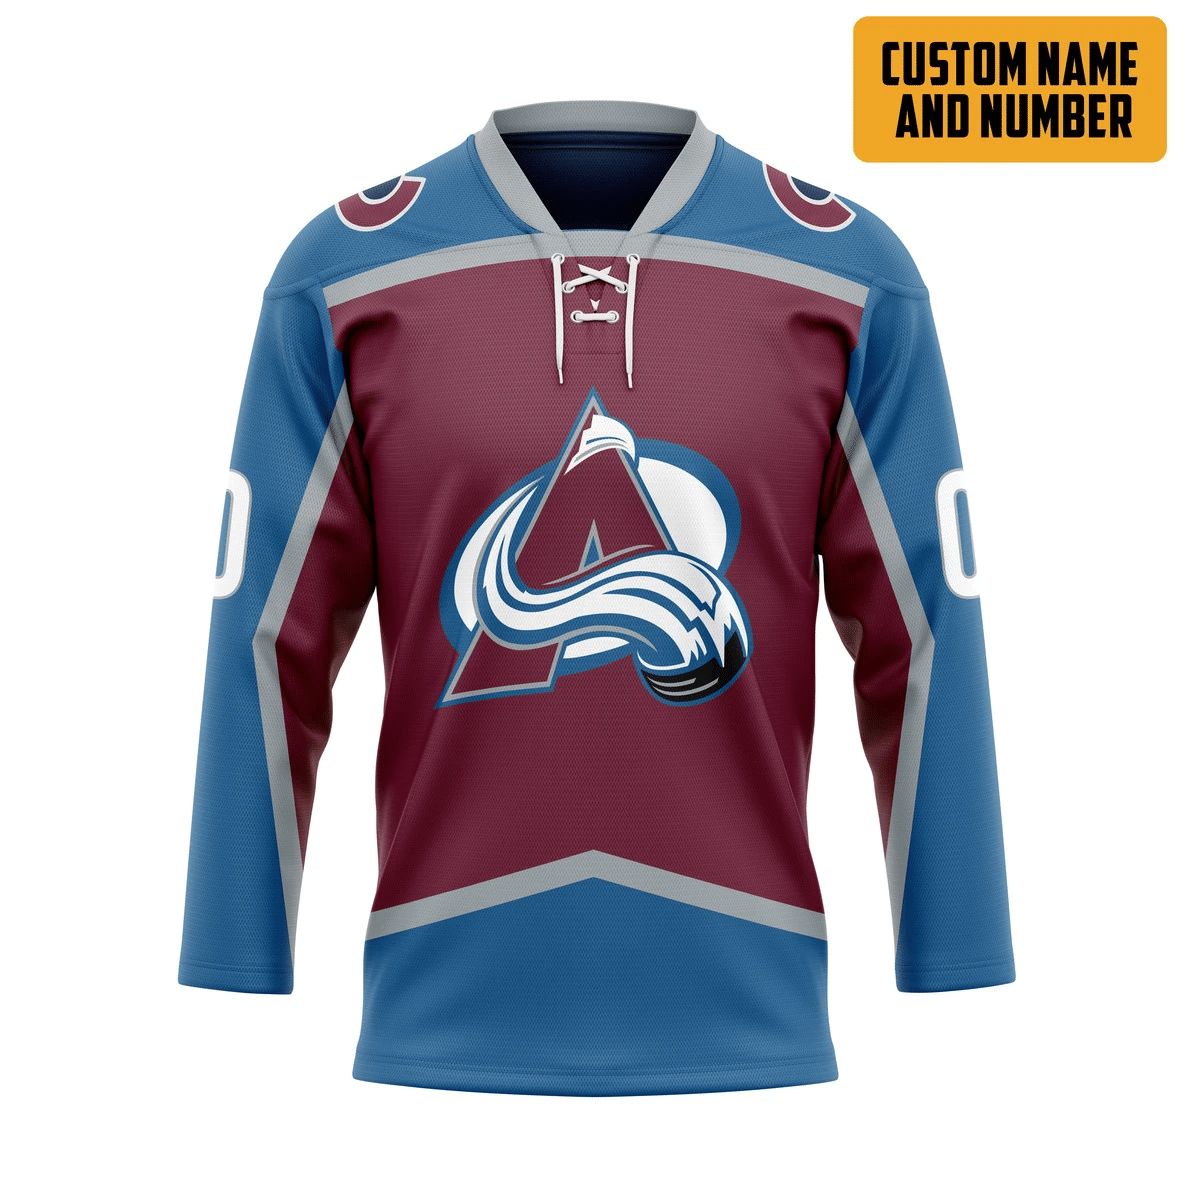 Choosing a hockey jersey is not as difficult as you think. 83